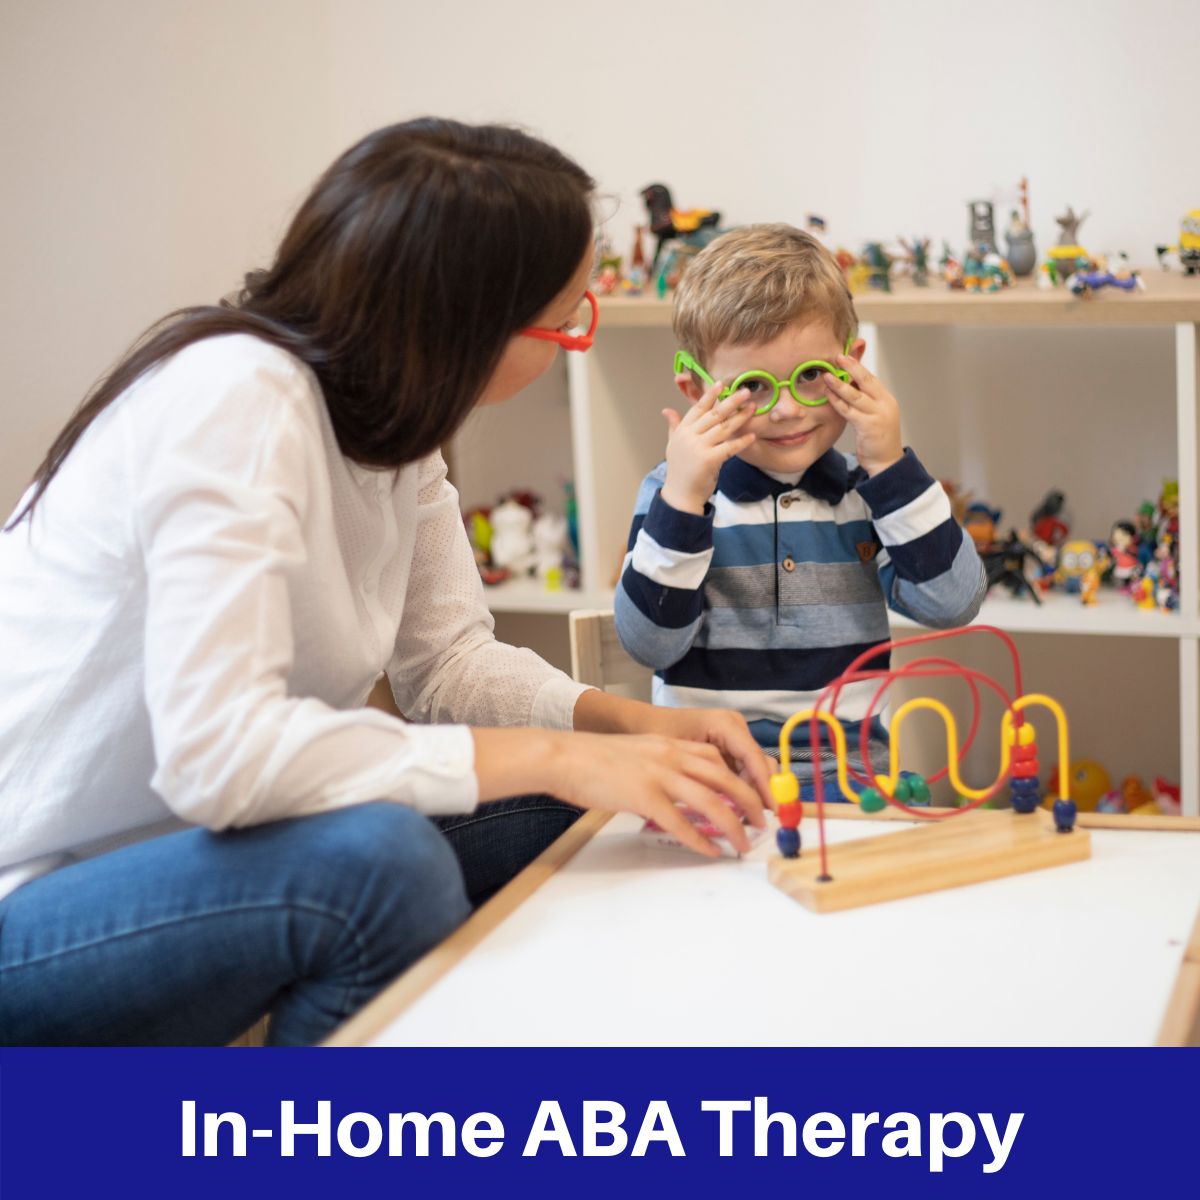 In-Home ABA Therapy